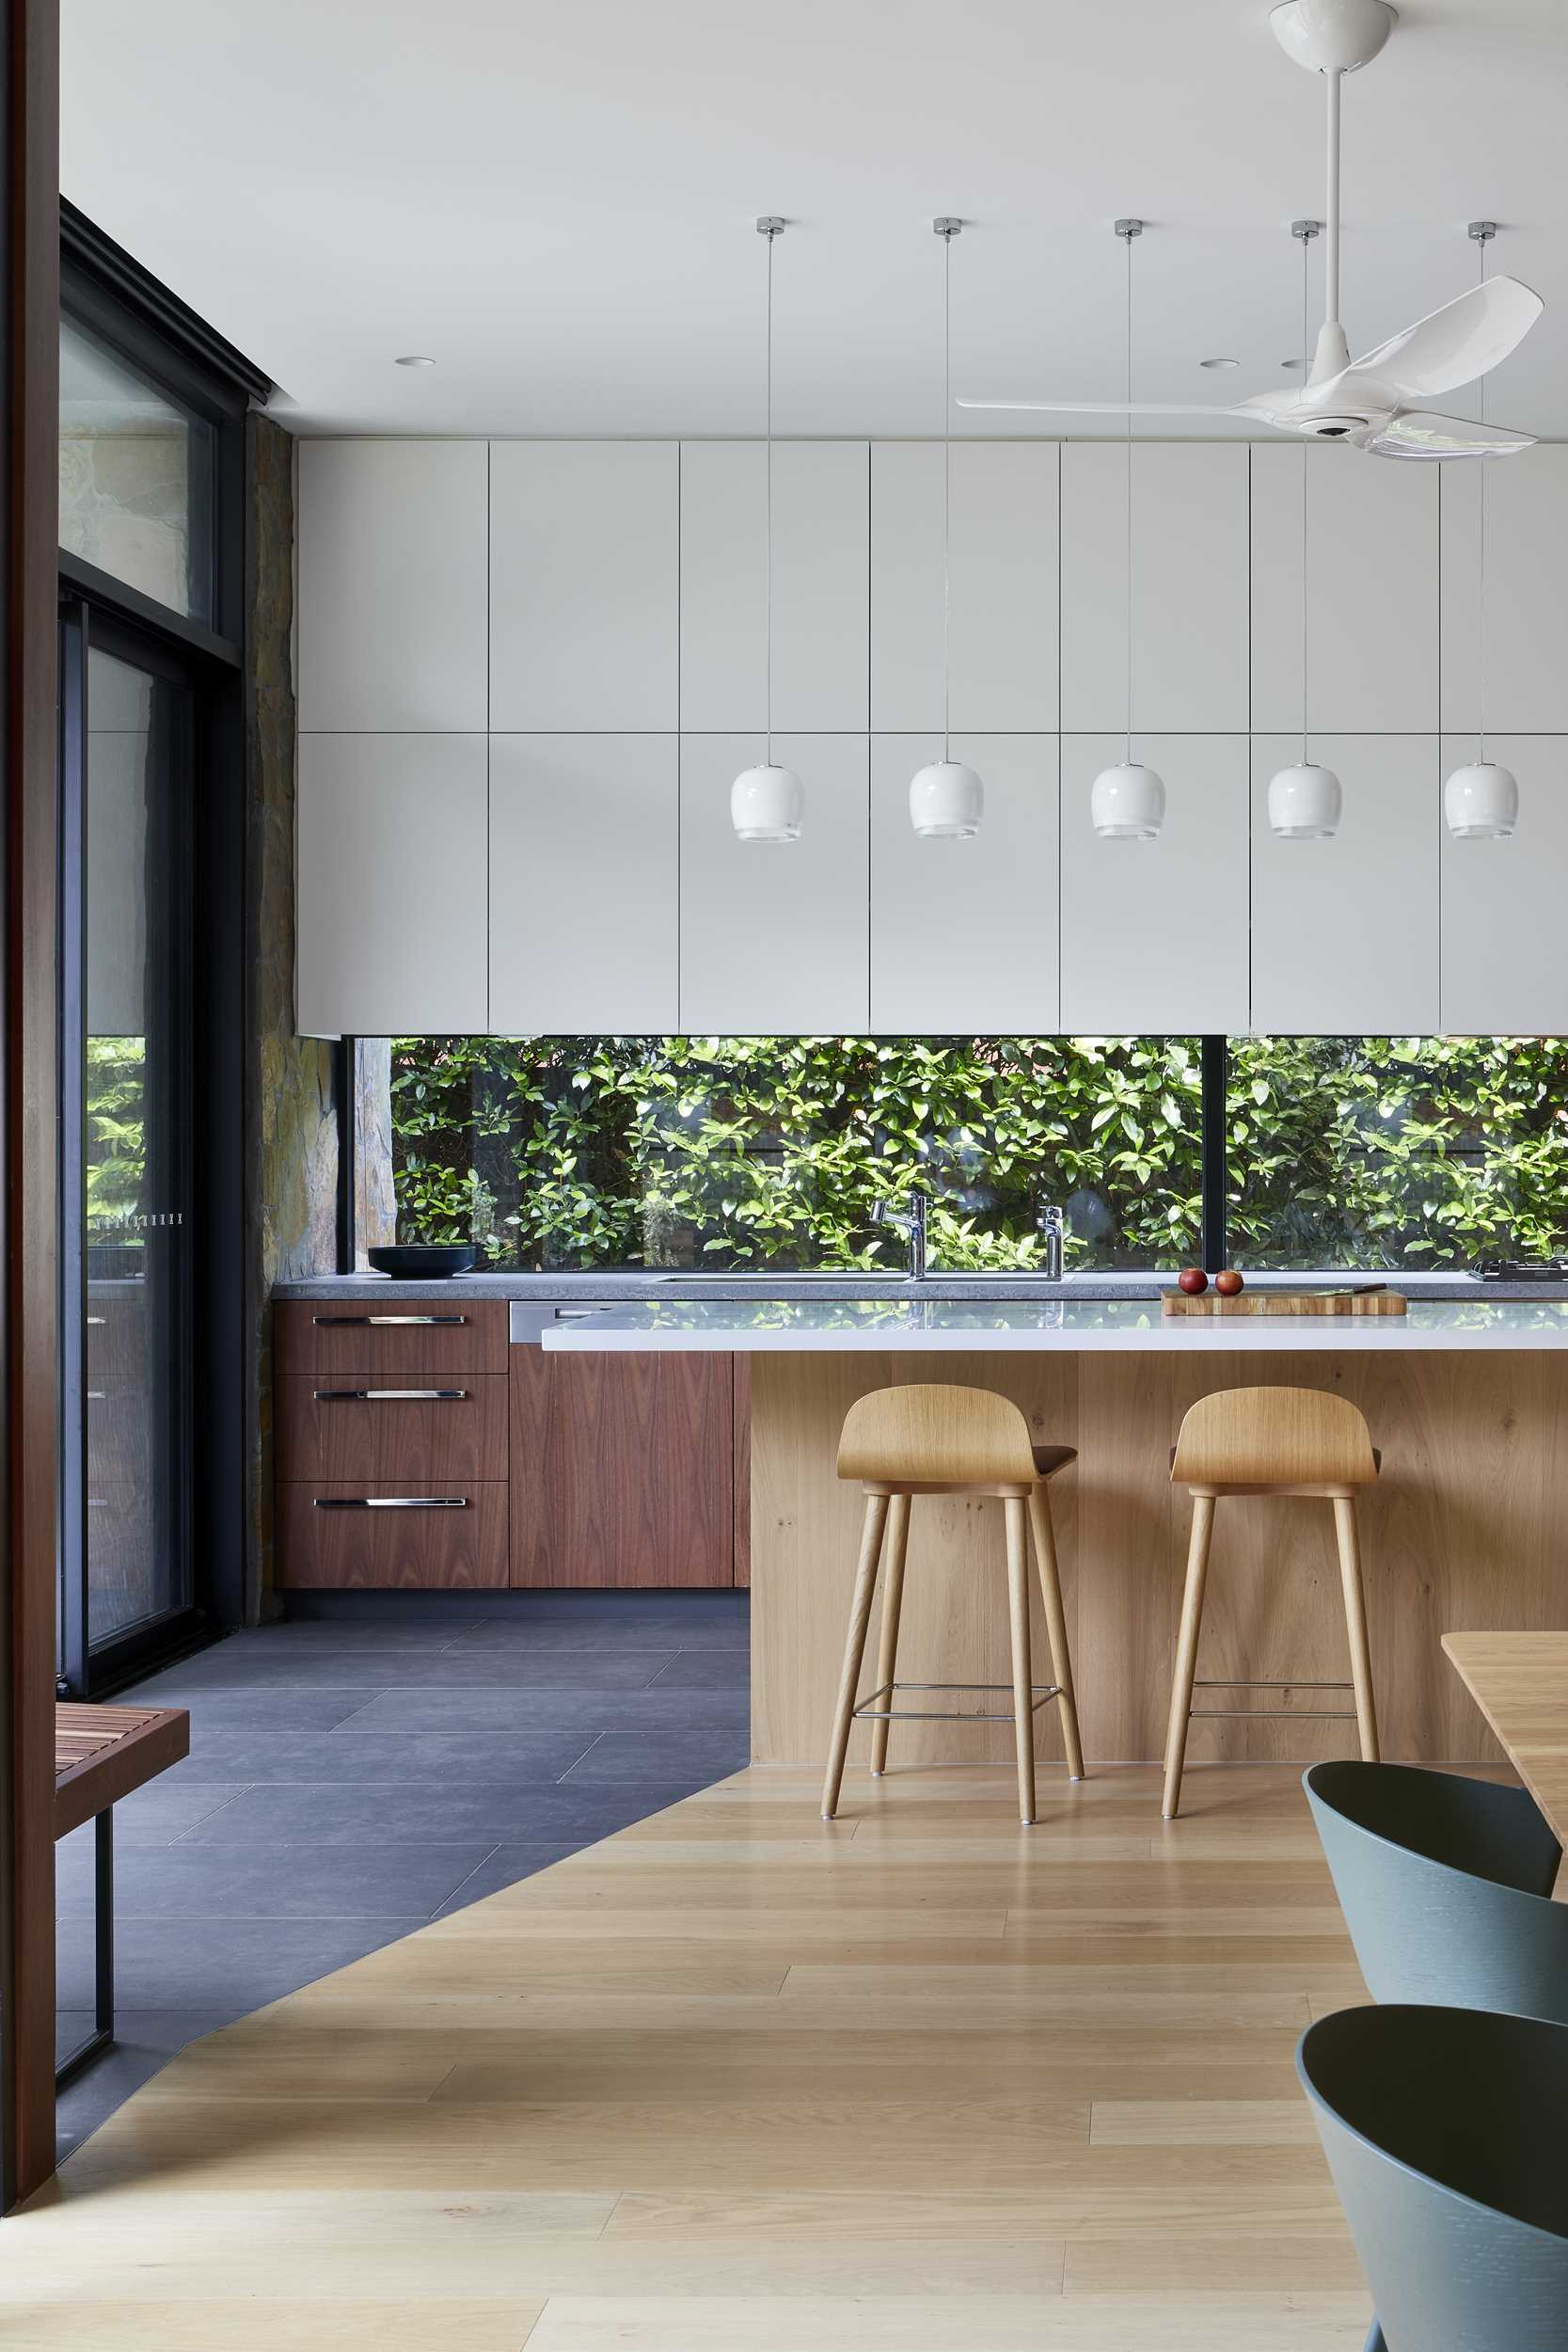 In this modern kitchen, dark wood cabinetry has been paired with minimalist white cabinets, while the island has room for a pair of stools and seven pendant lights to ensure the island is well-lit. The kitchen also includes a gl، backsplash, allowing the plants outside to be seen.